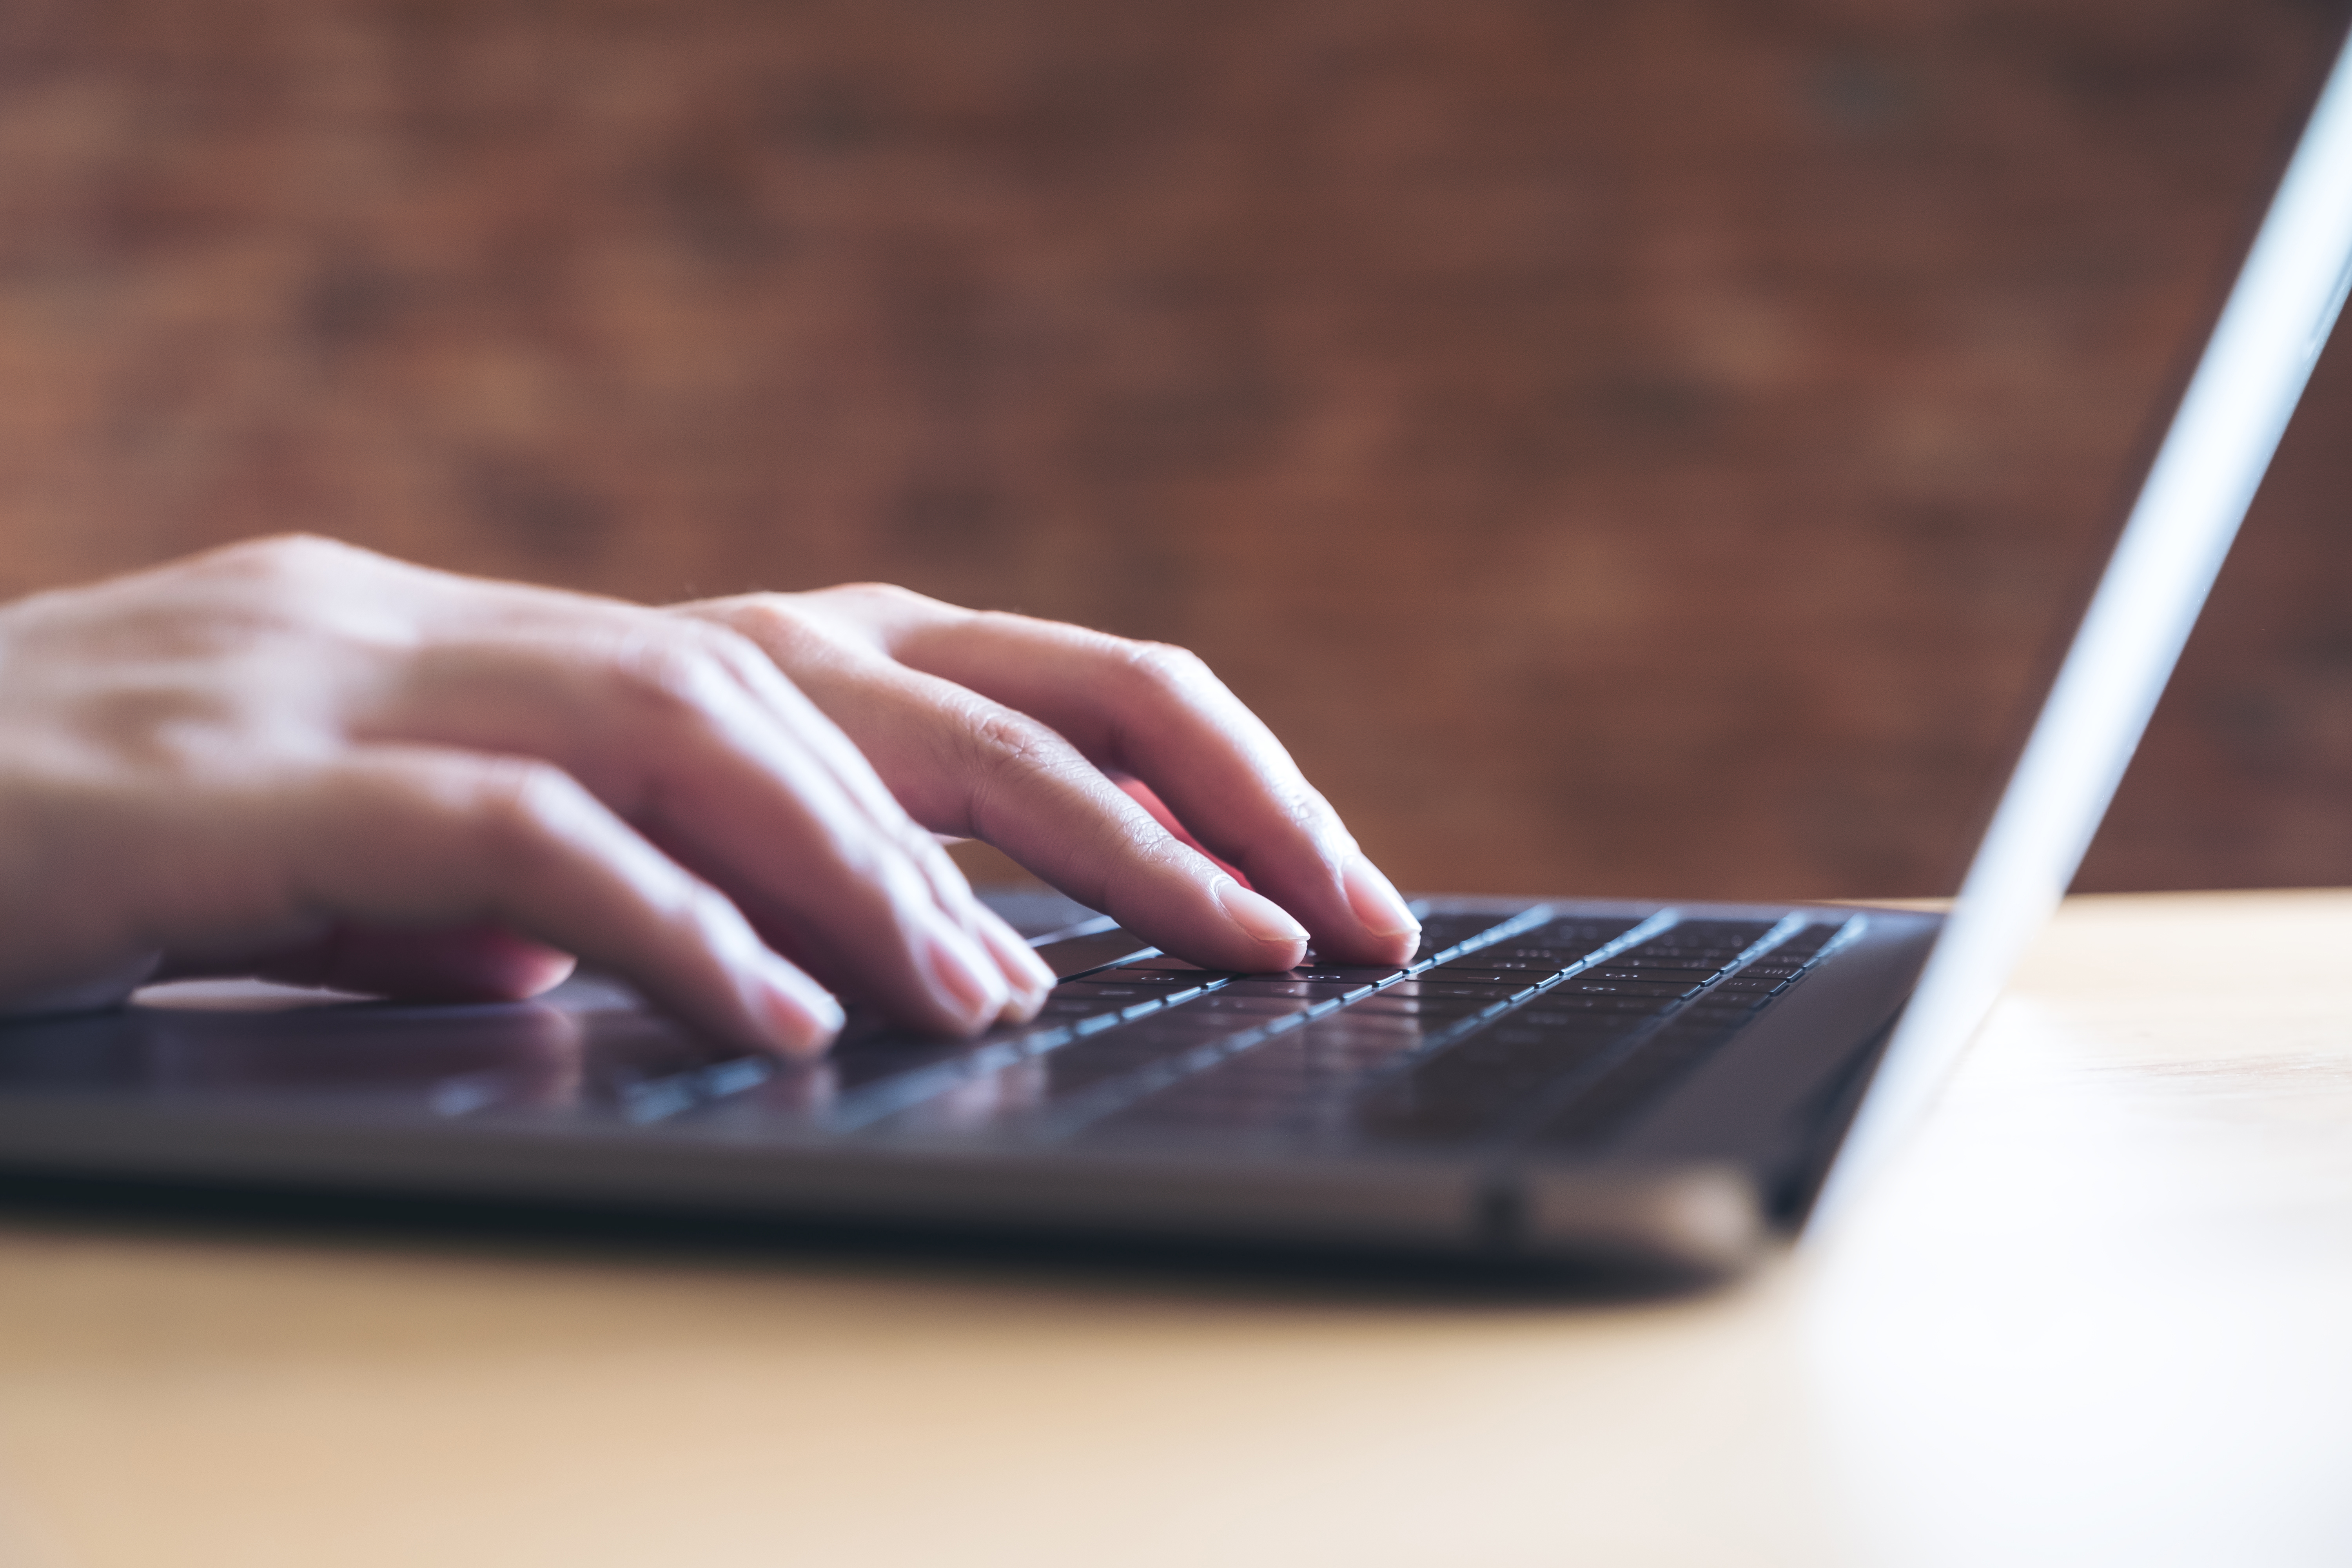 Closeup image of hands working and typing on laptop keyboard in